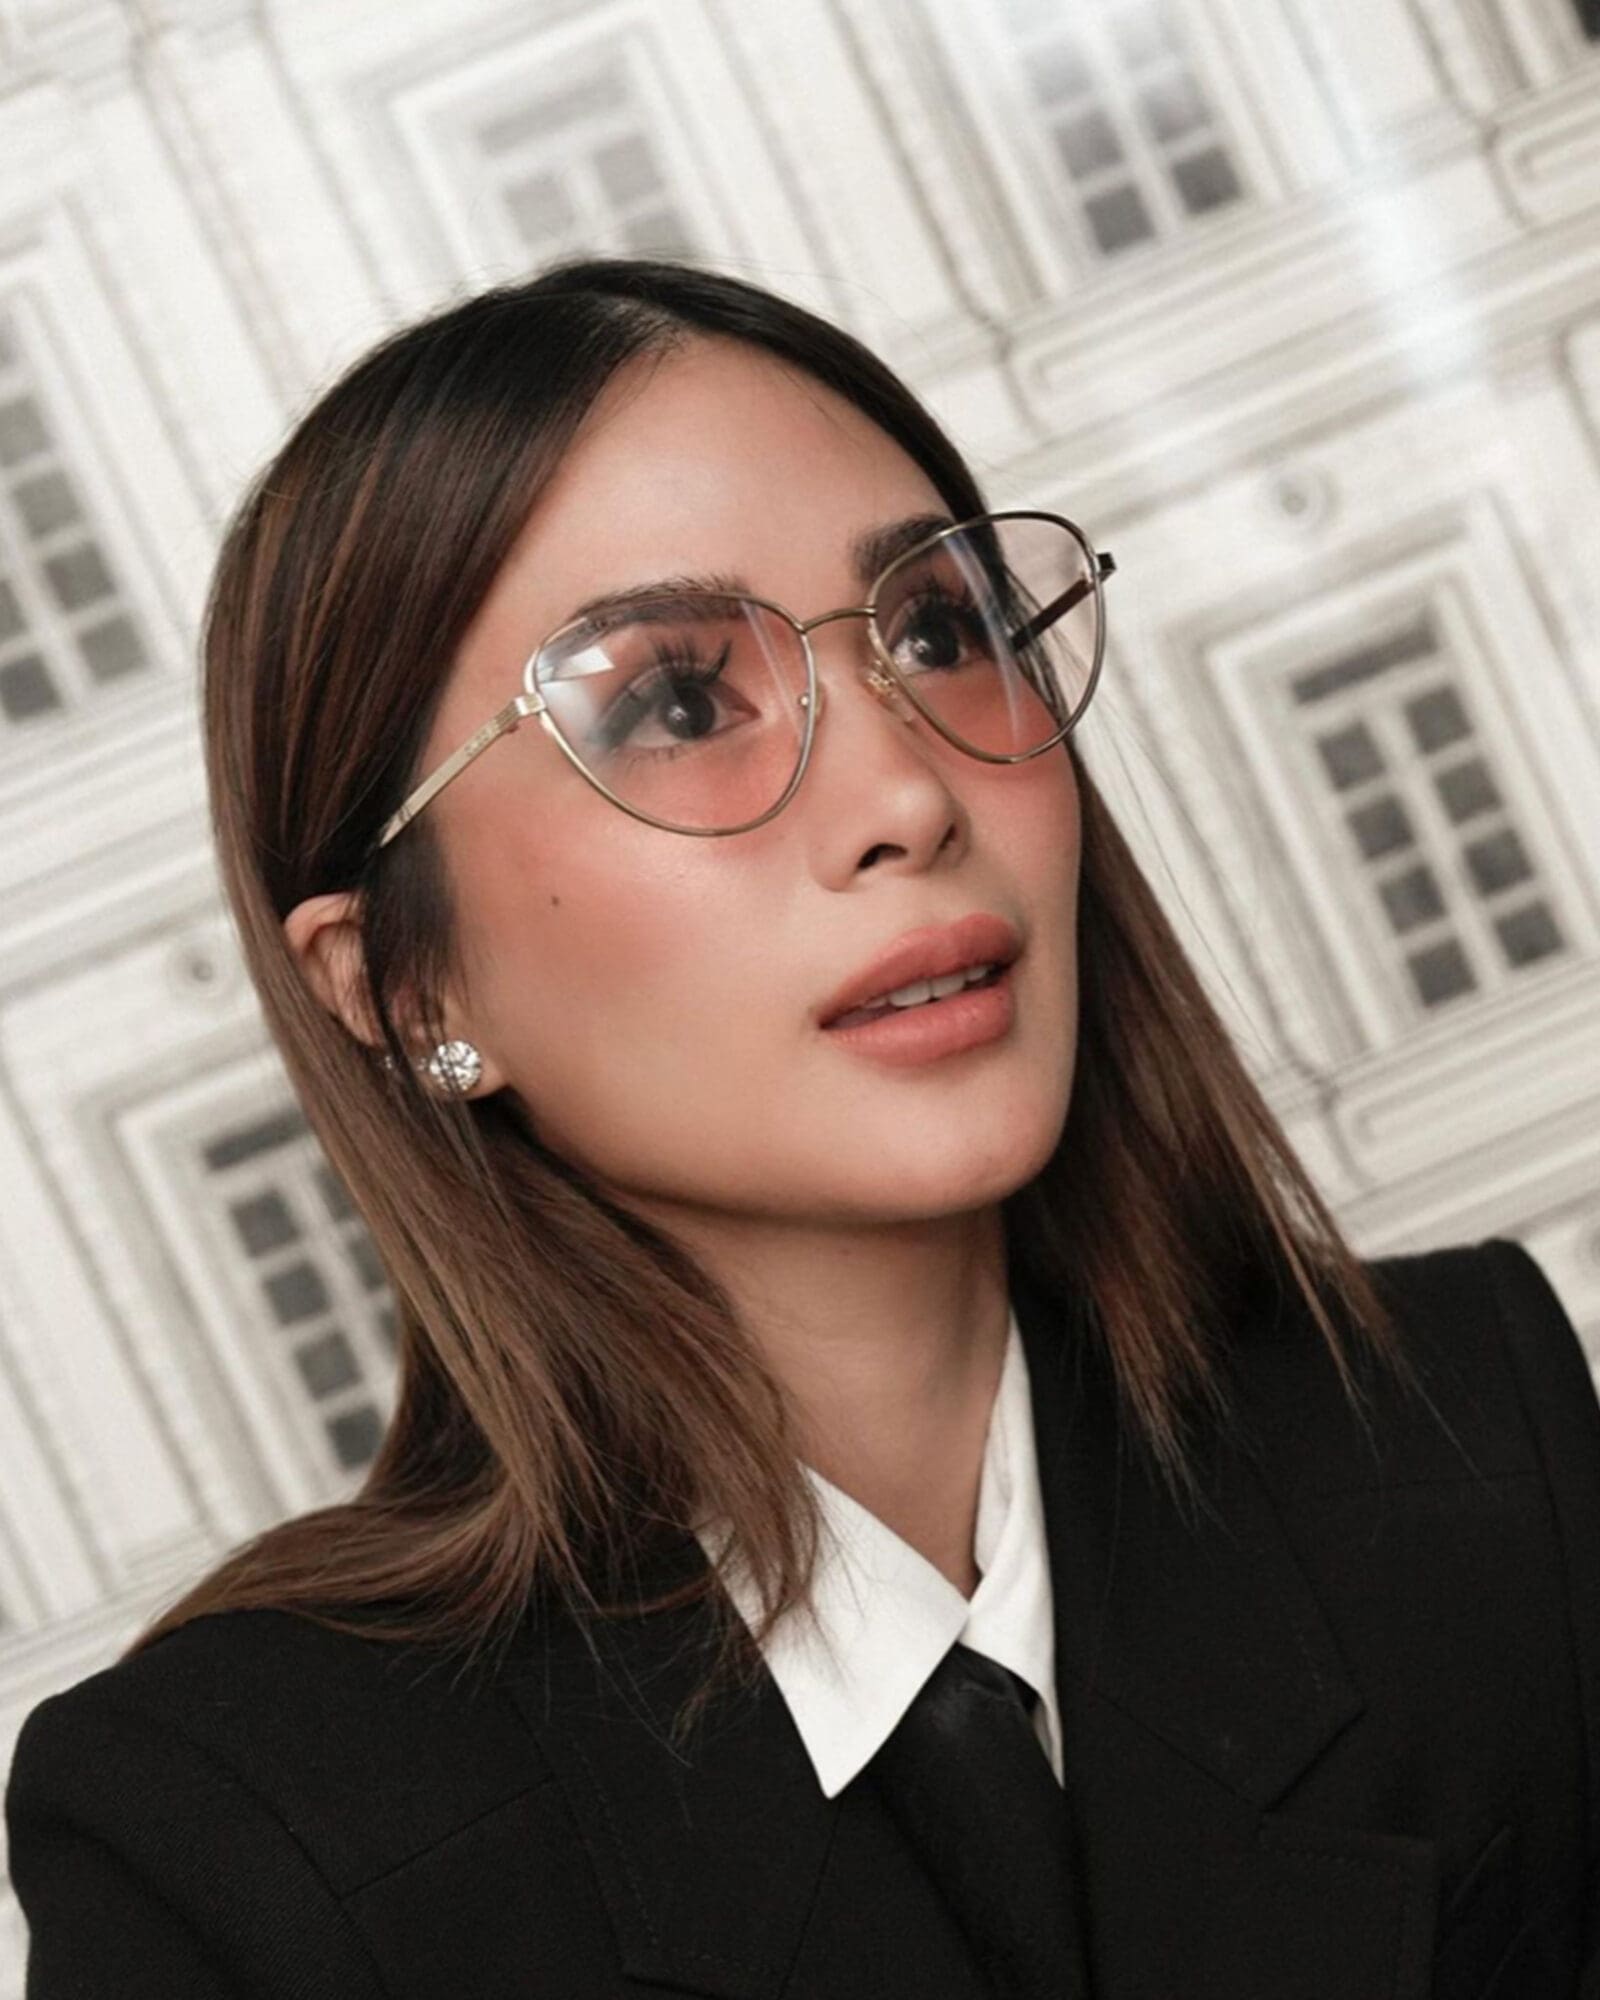 Heart Evangelista wearing Rose-tinted cat-eye sunglasses from Gucci